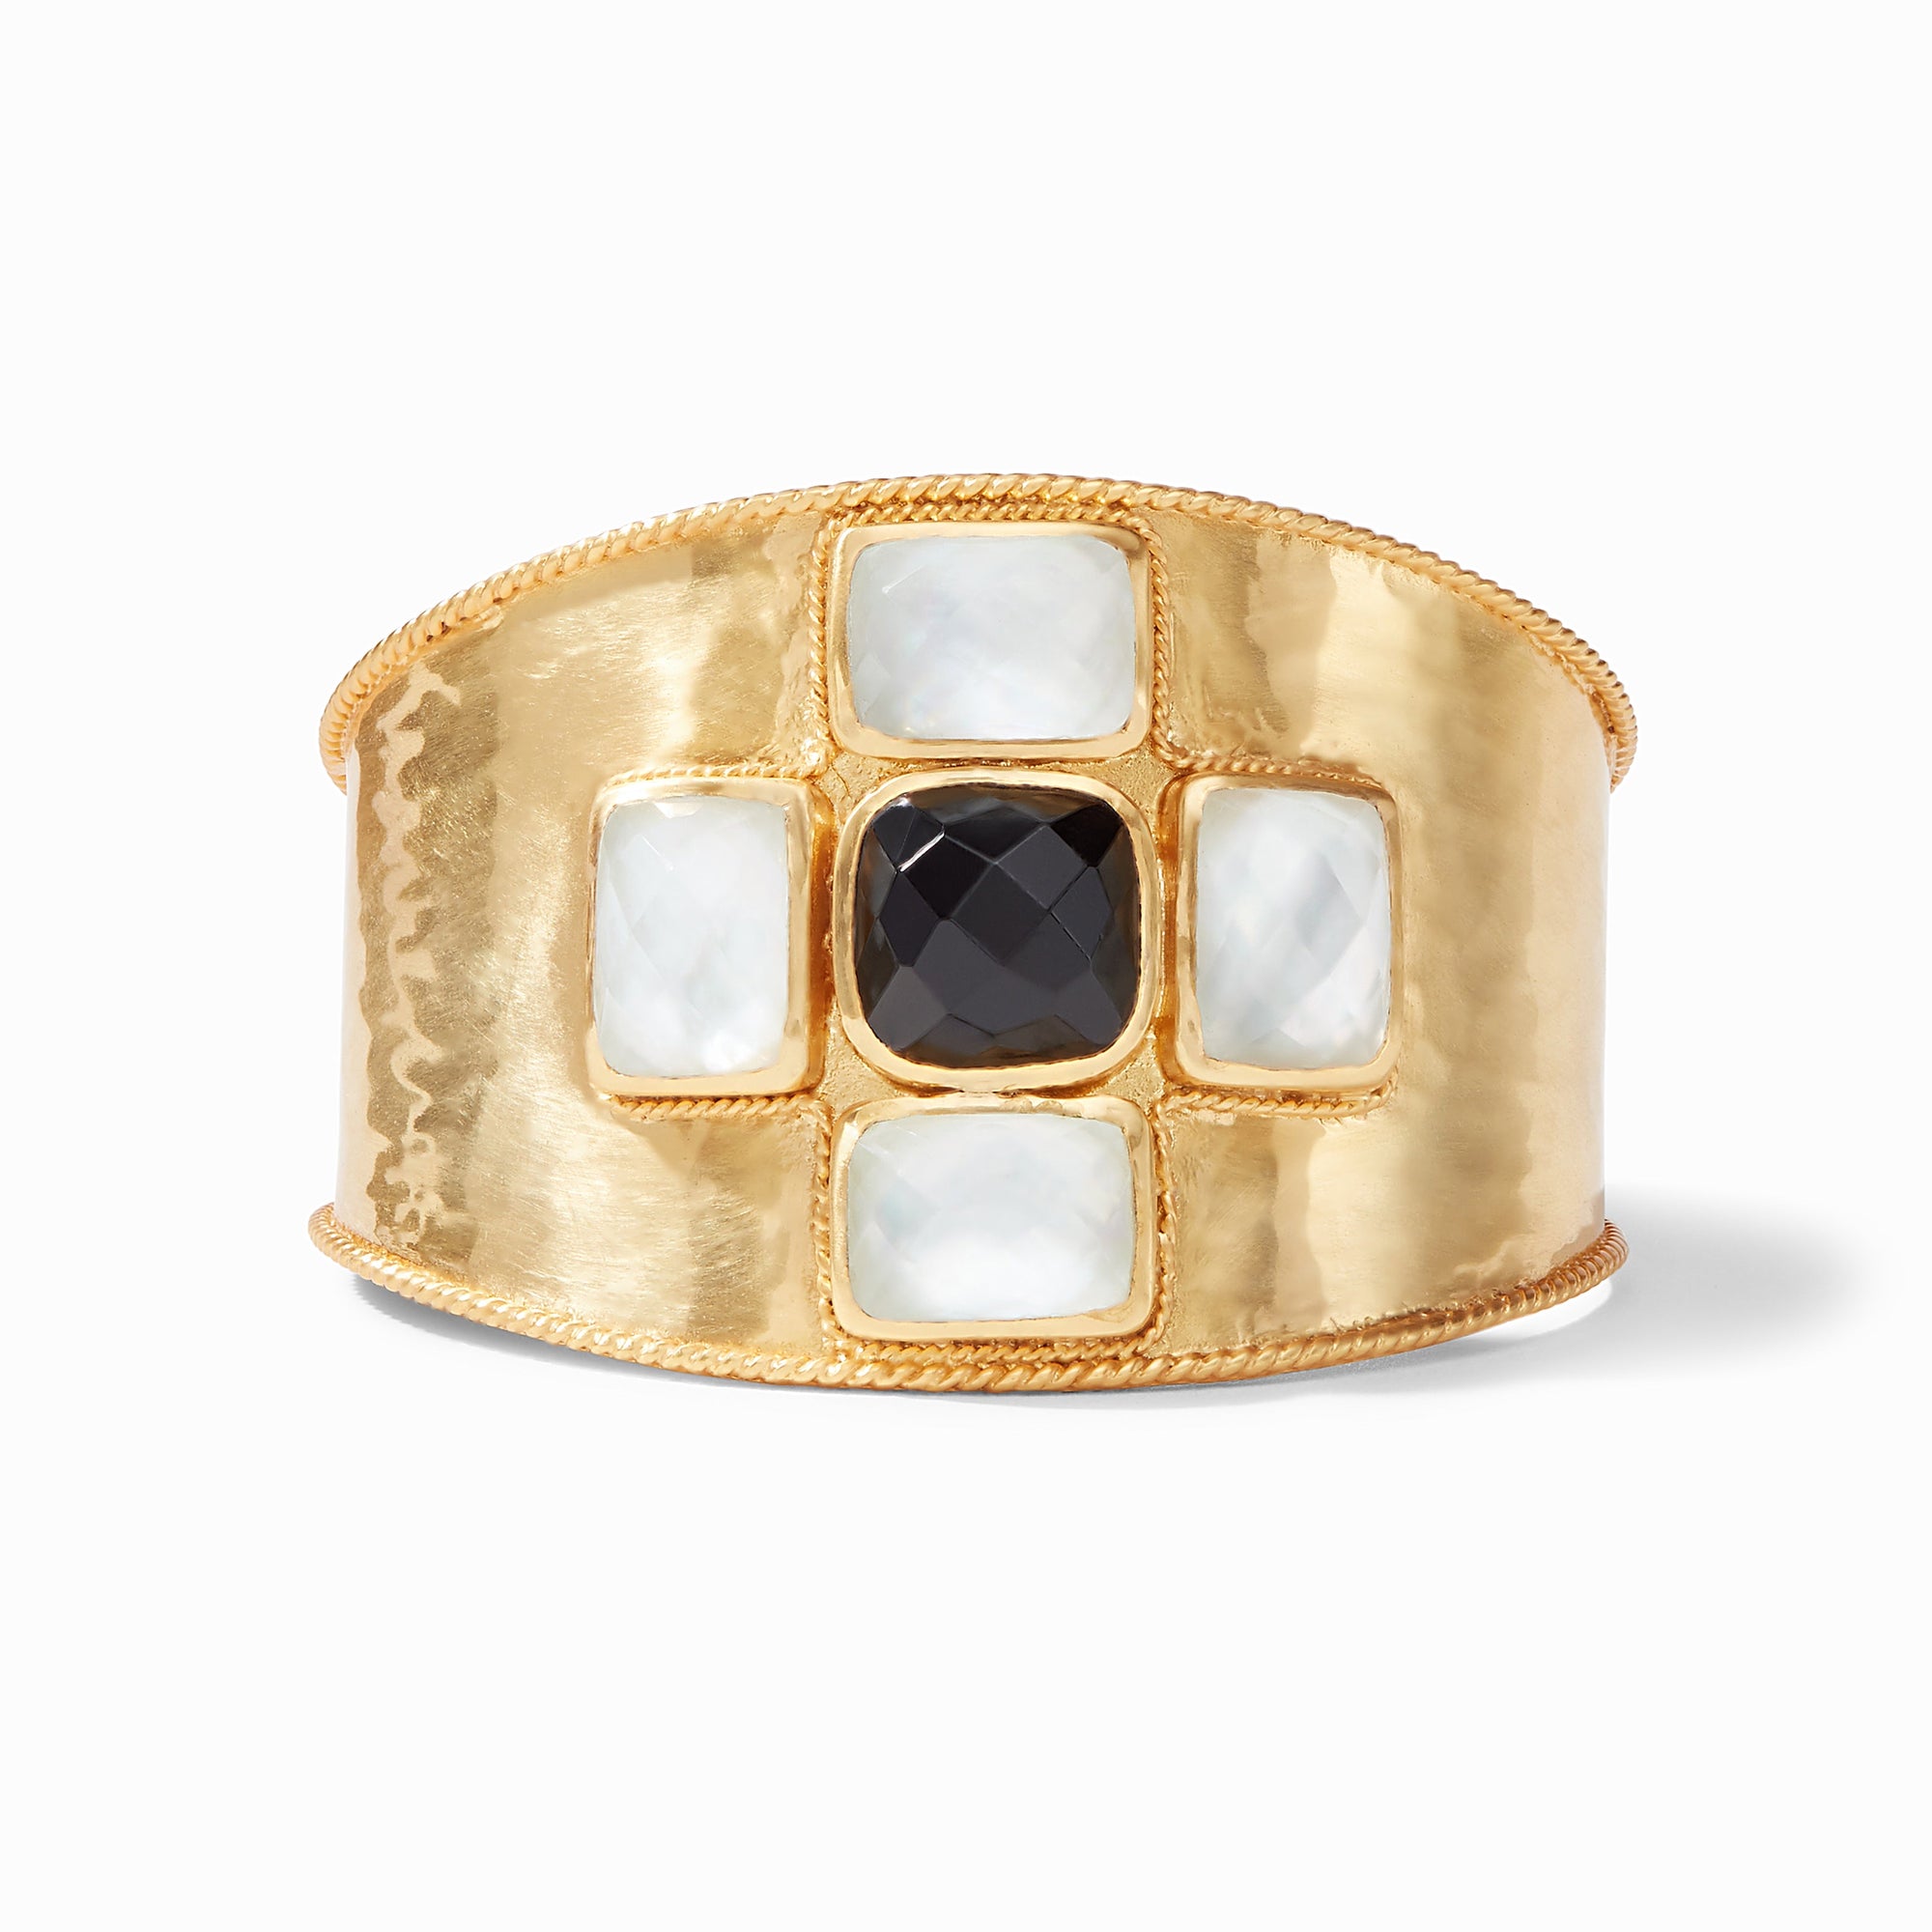 Julie Vos - Savoy Cuff, Iridescent Clear Crystal and Obsidian Black